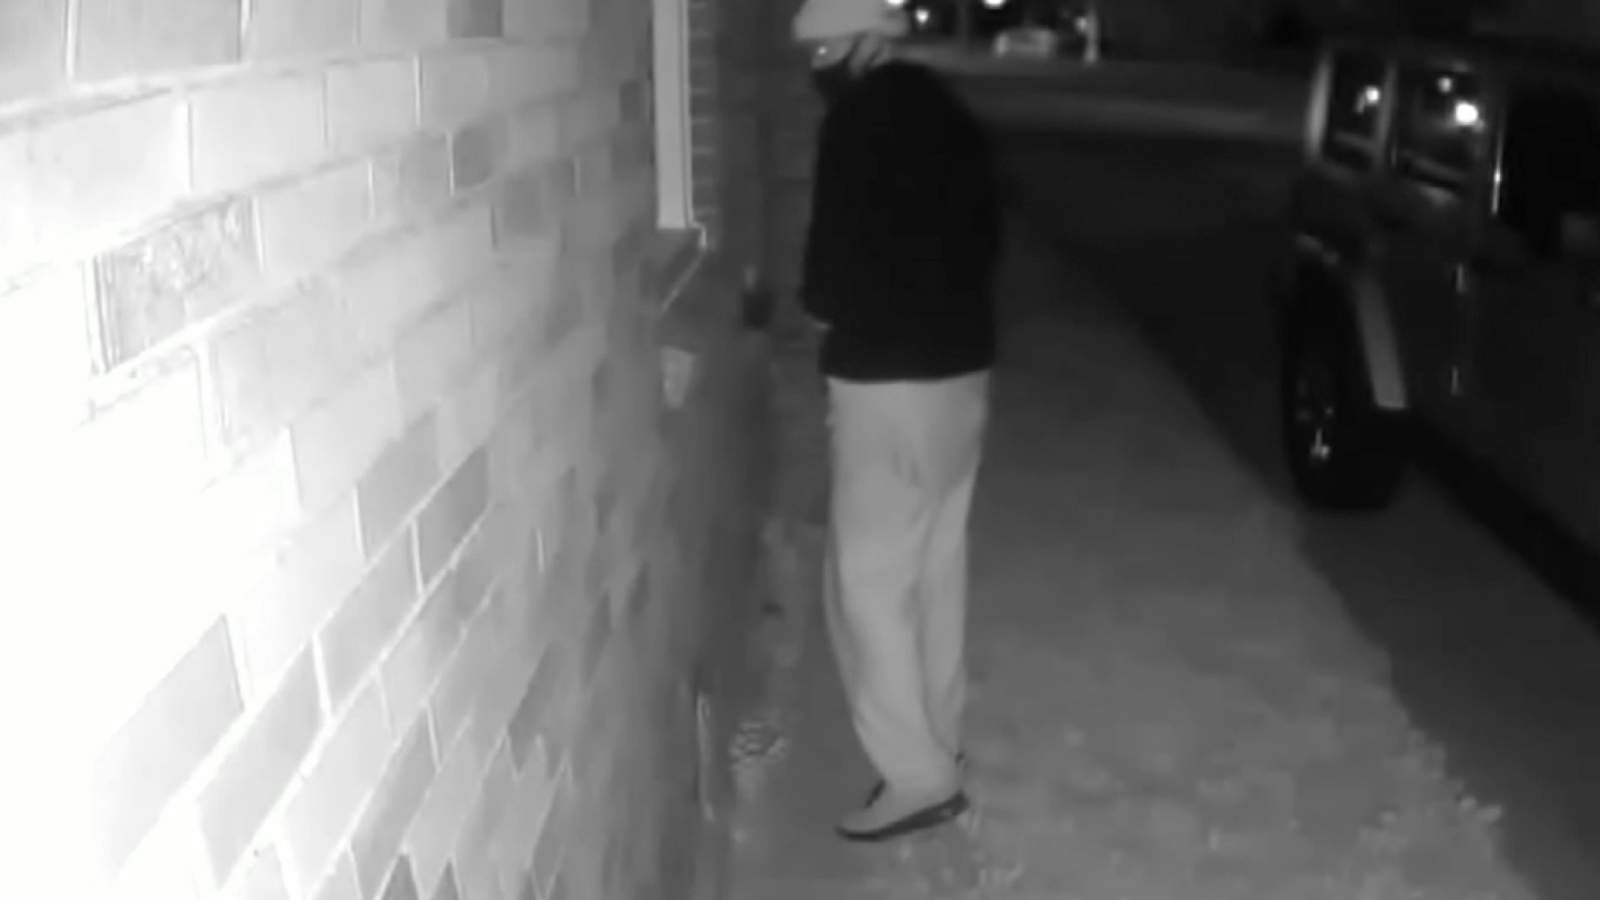 Eastpointe police searching for Peeping Tom caught on camera outside childs bedroom